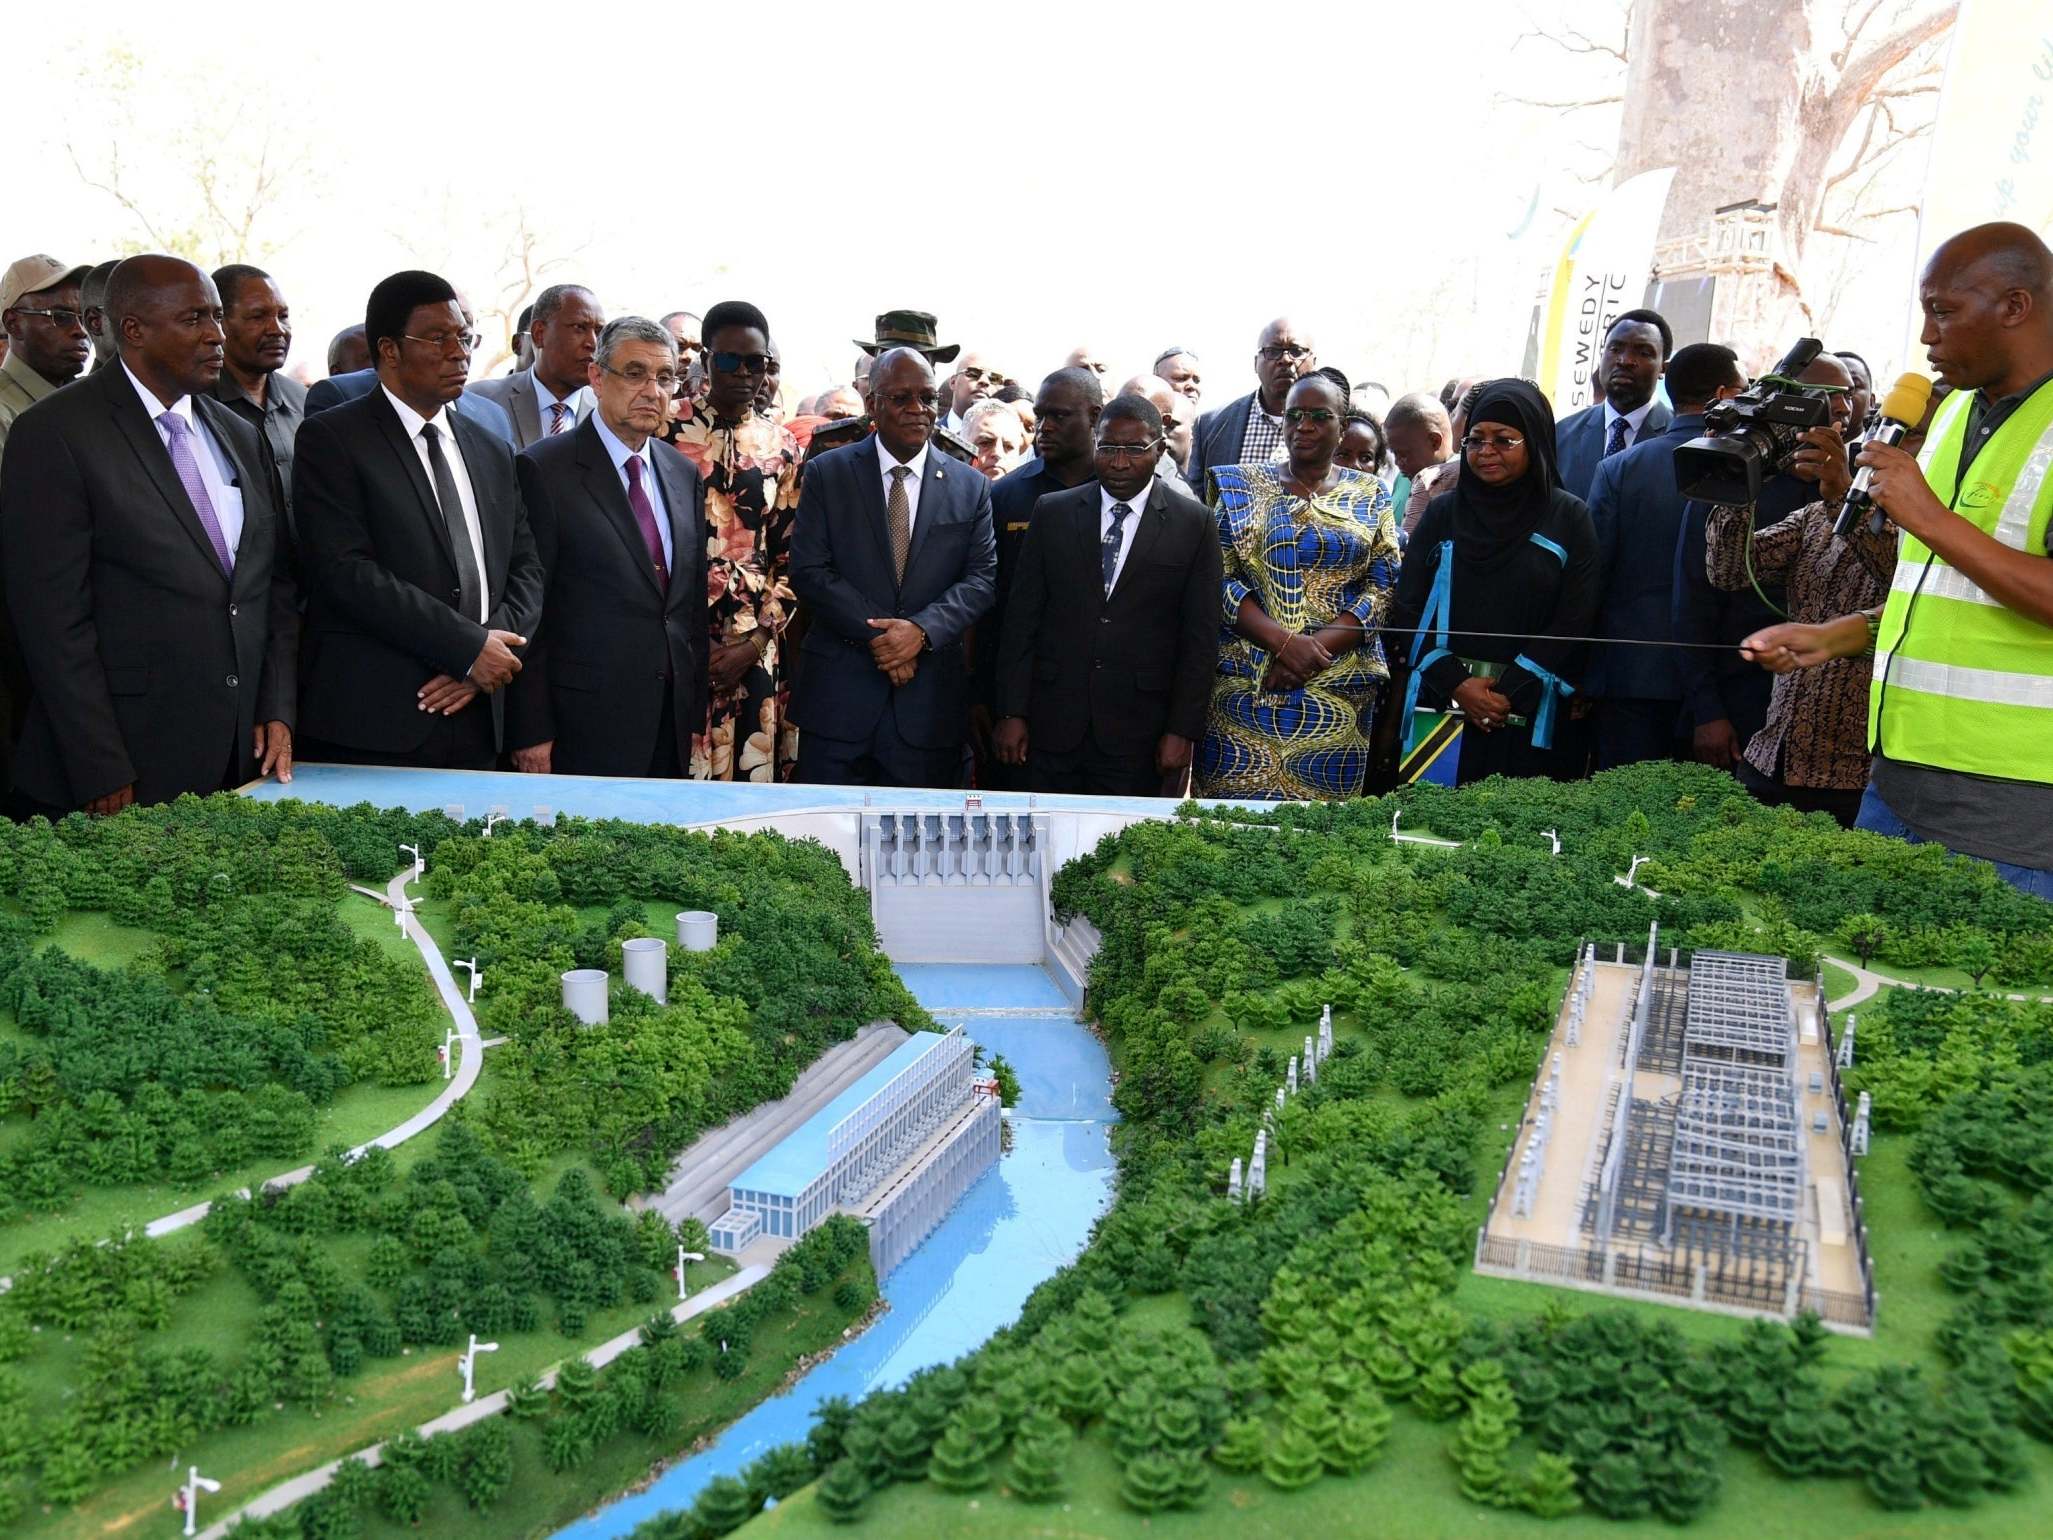 Mr Magufuli (centre) at the ceremony with a 3D model of the project